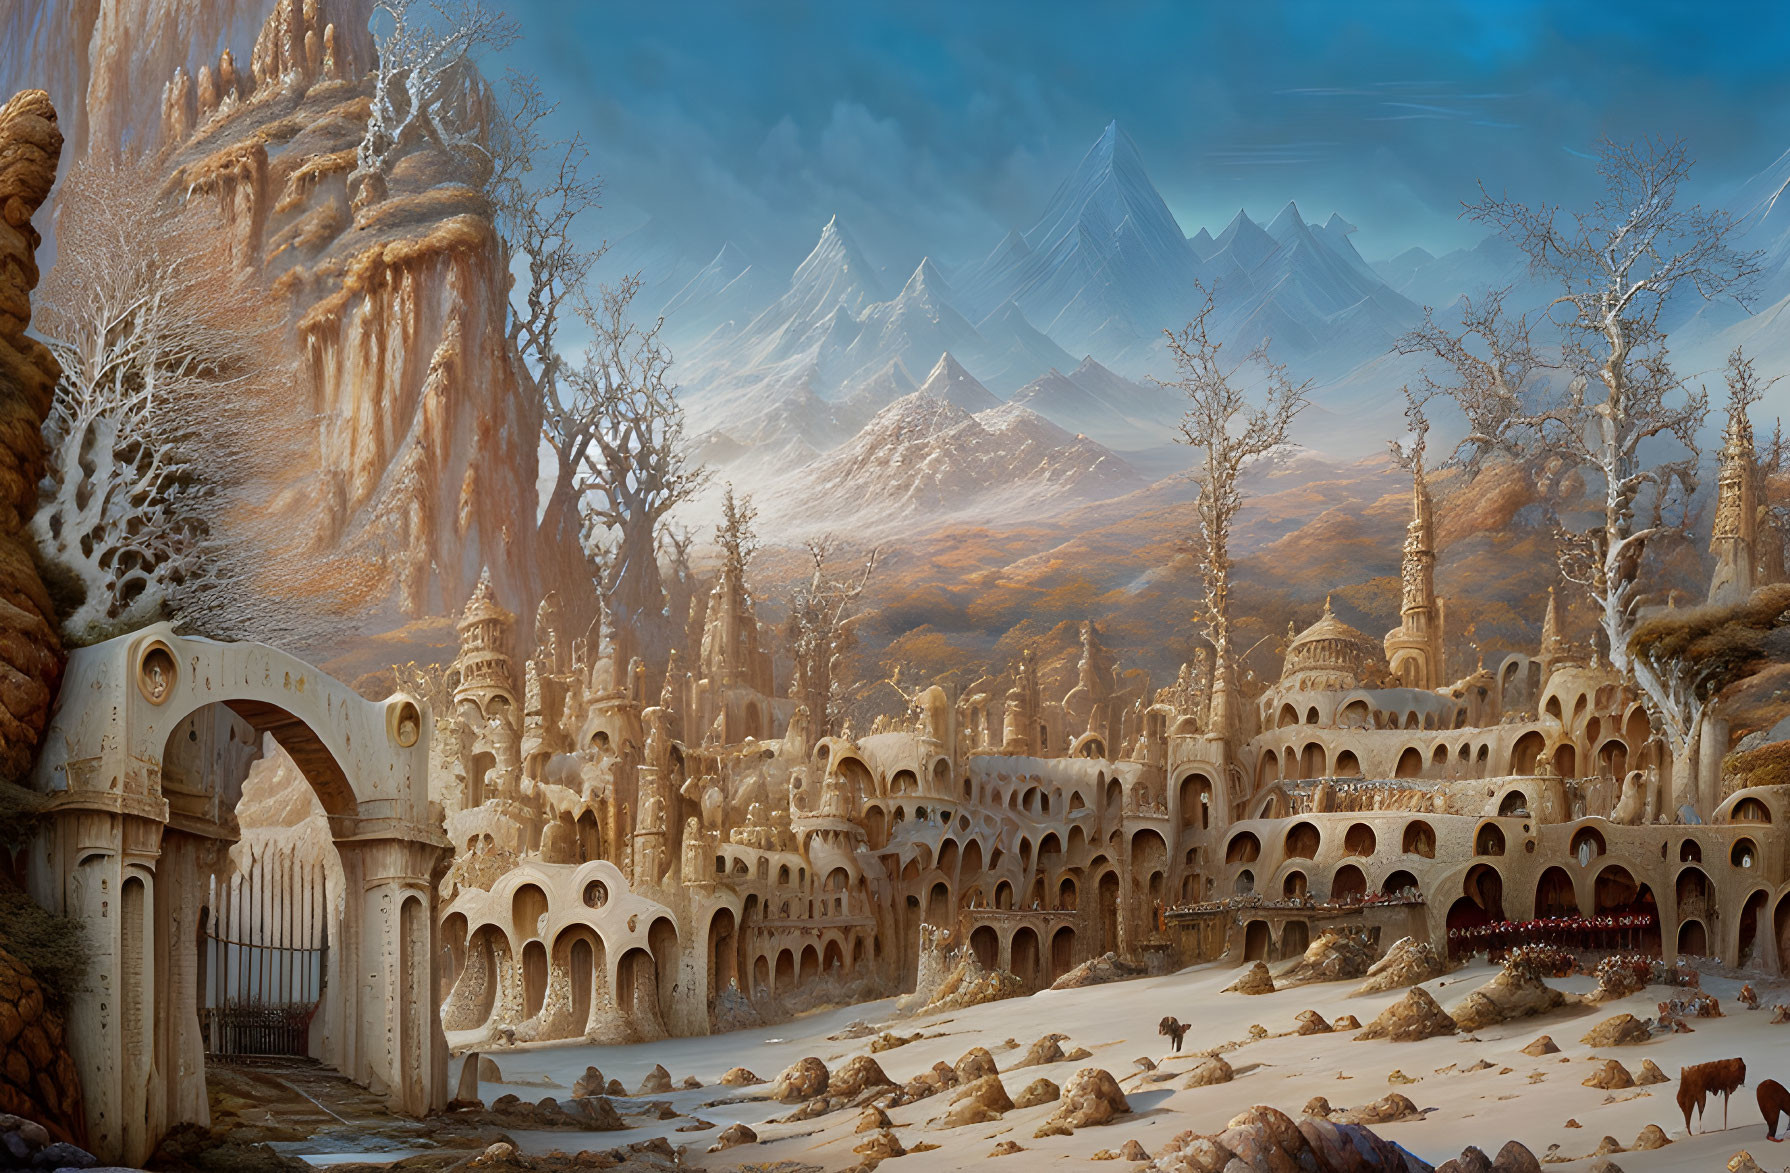 Fantastical sandstone-like structures in snowy mountain landscape